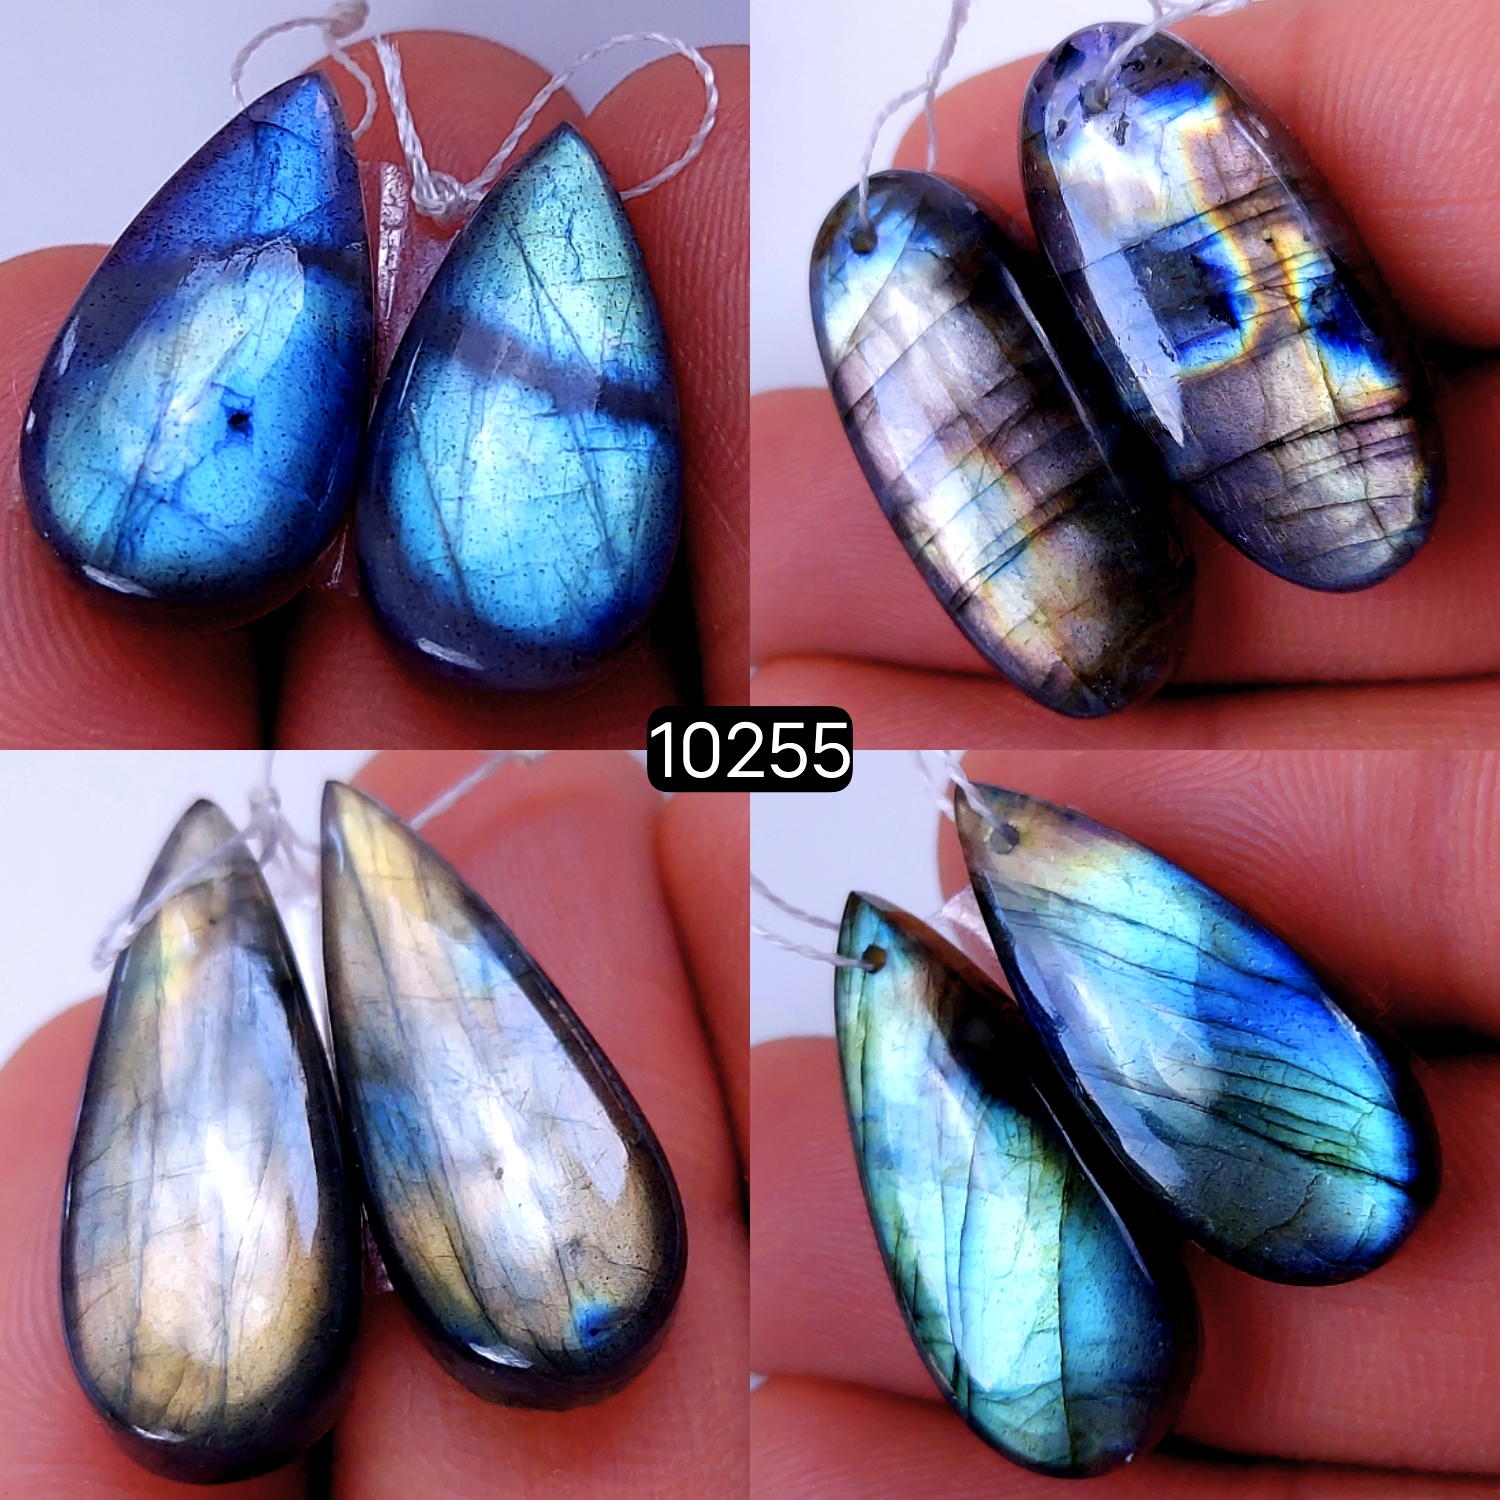 4Pair 125Cts Natural Labradorite Crystal Drill Dangle Drop Earring Pairs Silver Earrings Blue Labradorite Hoop Jewelry  27x11 22x12mm #10255